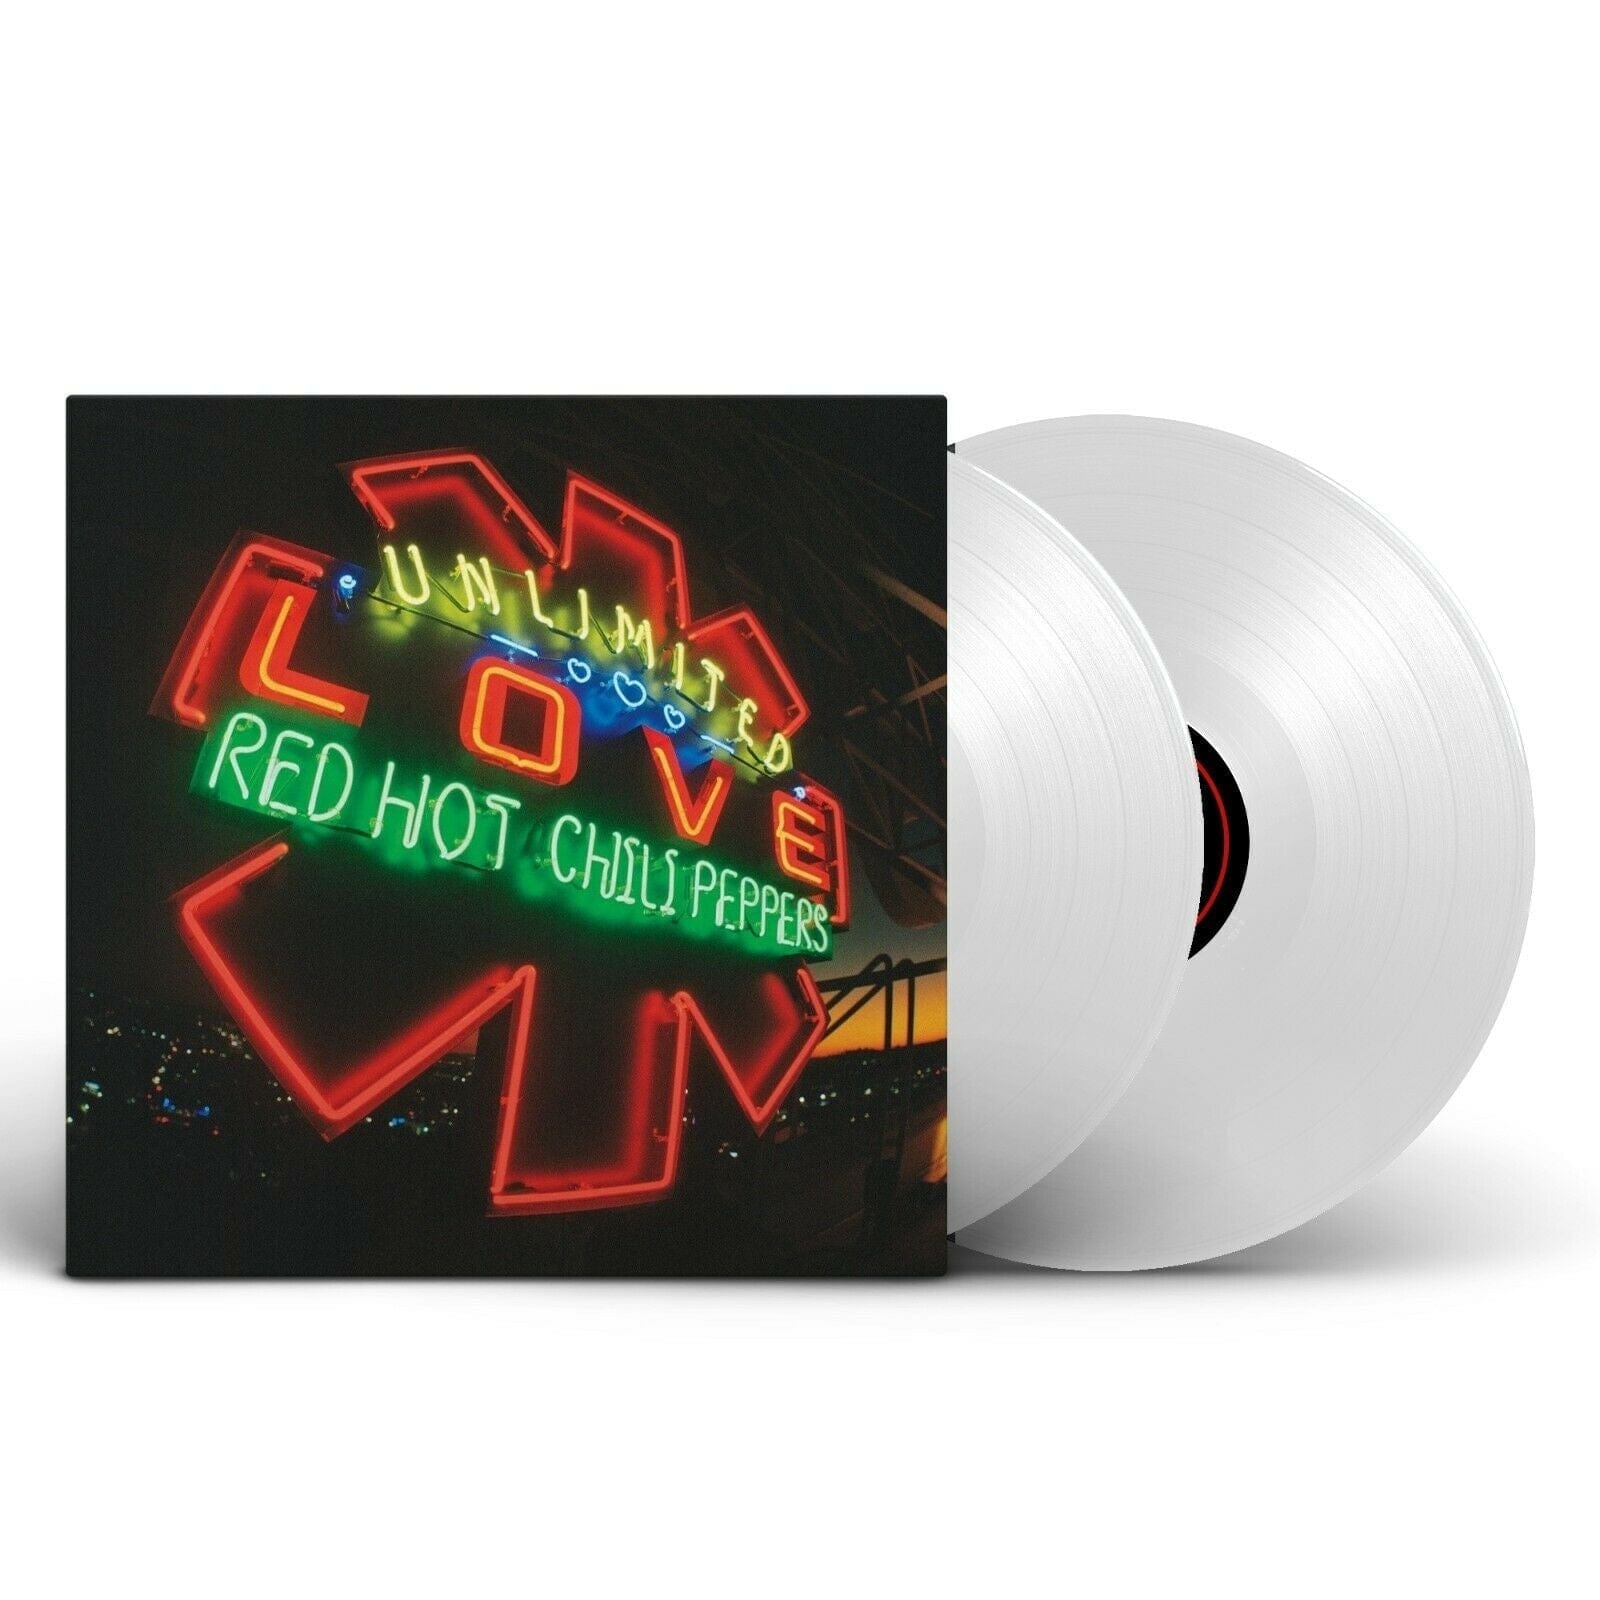 Unlimited Love (V8 Exclusive) (White Colour Vinyl - Red Hot Chili Peppers [VINYL Limited Edition]